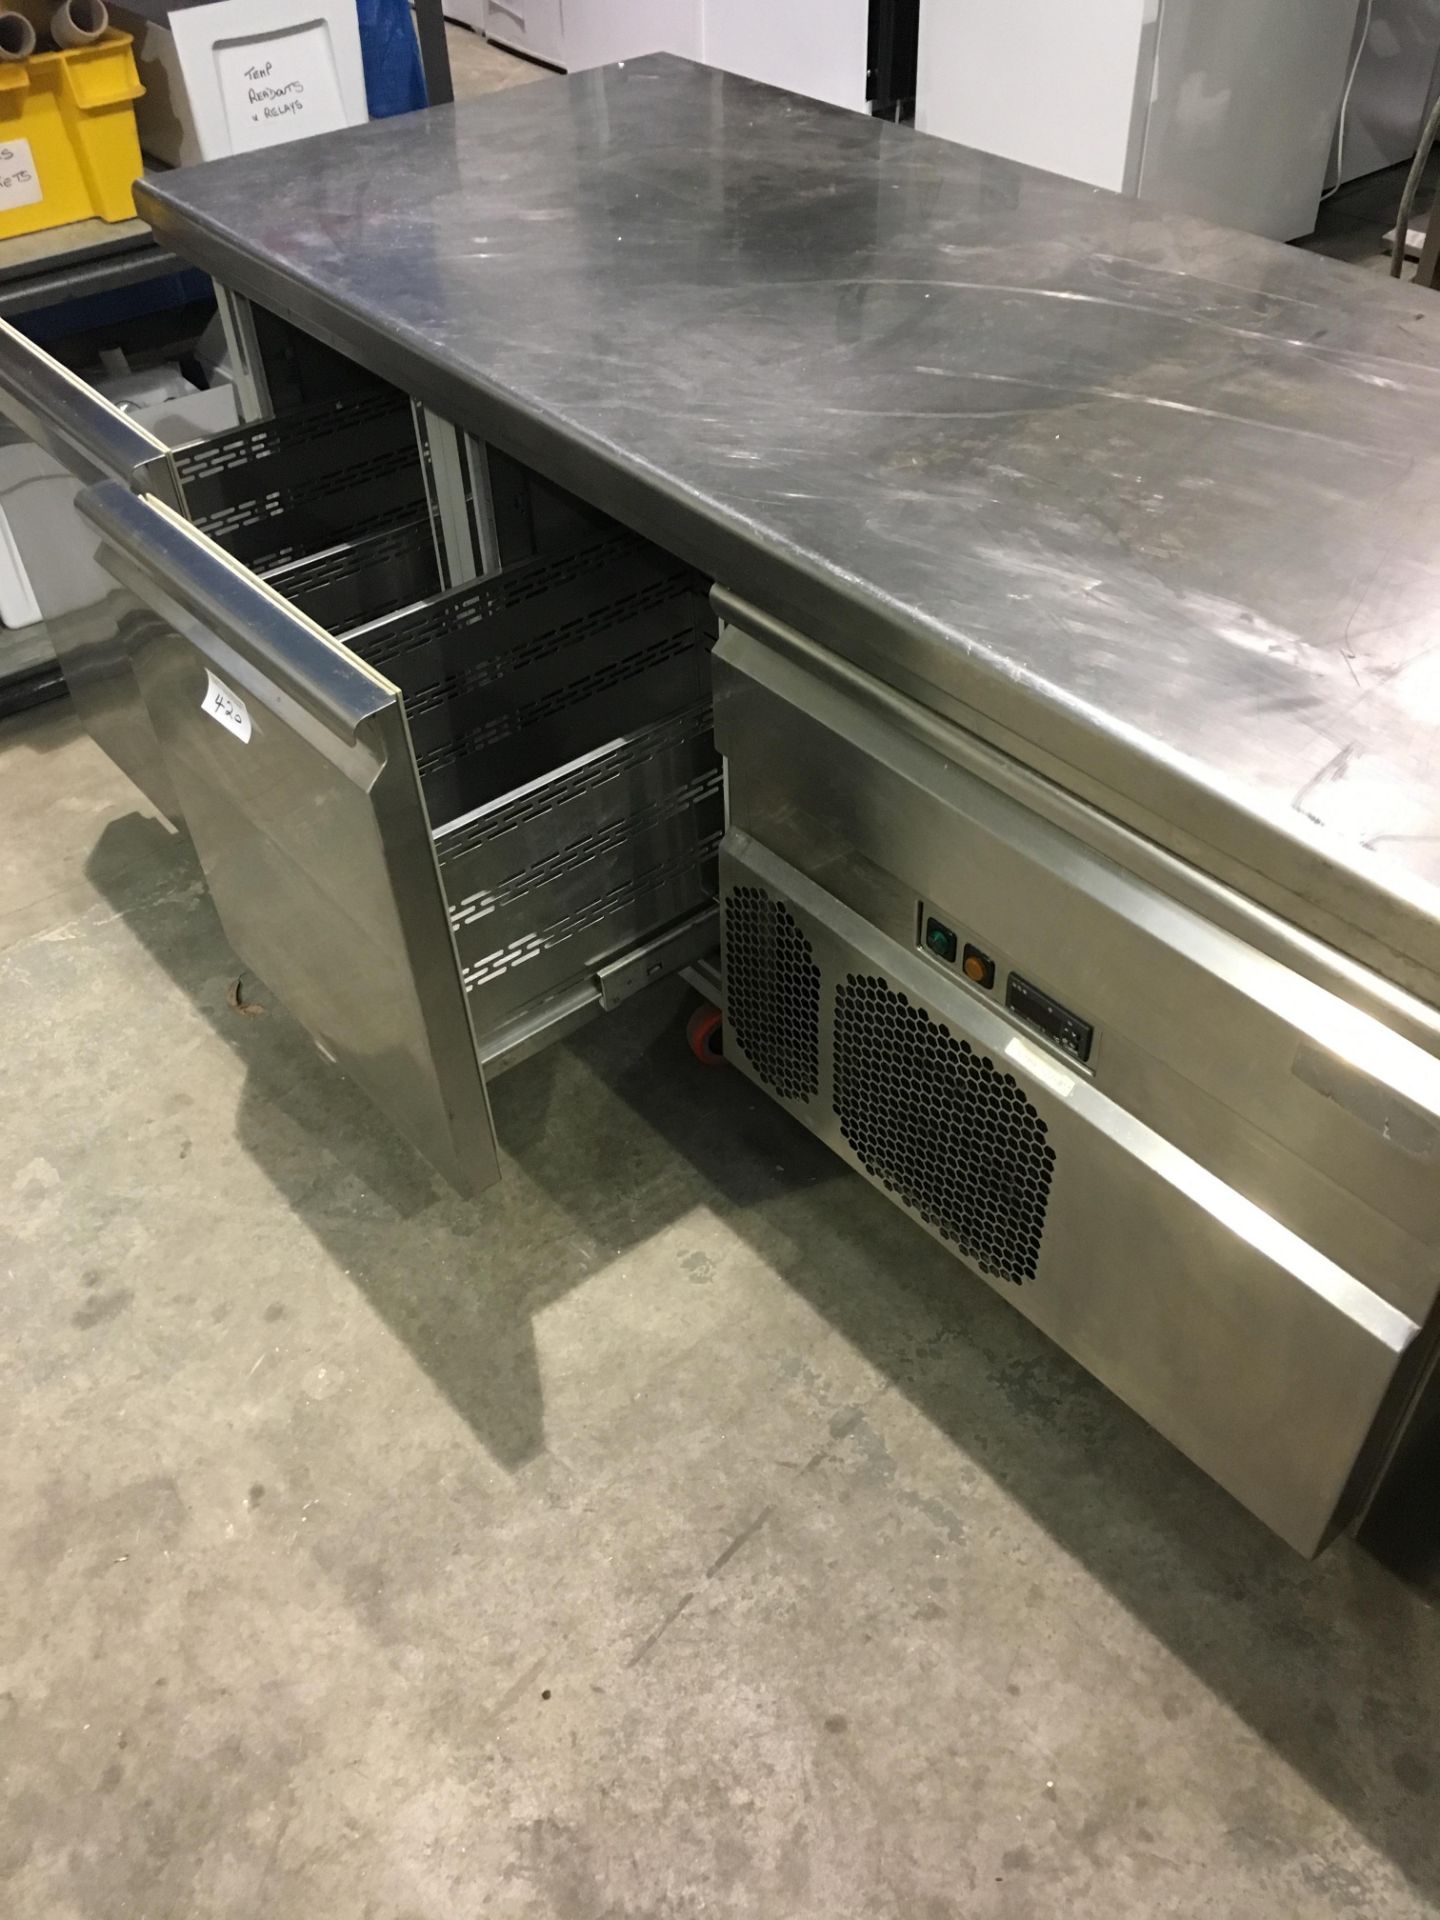 Refrigerated Prep Counter with Drawers. - Image 3 of 3